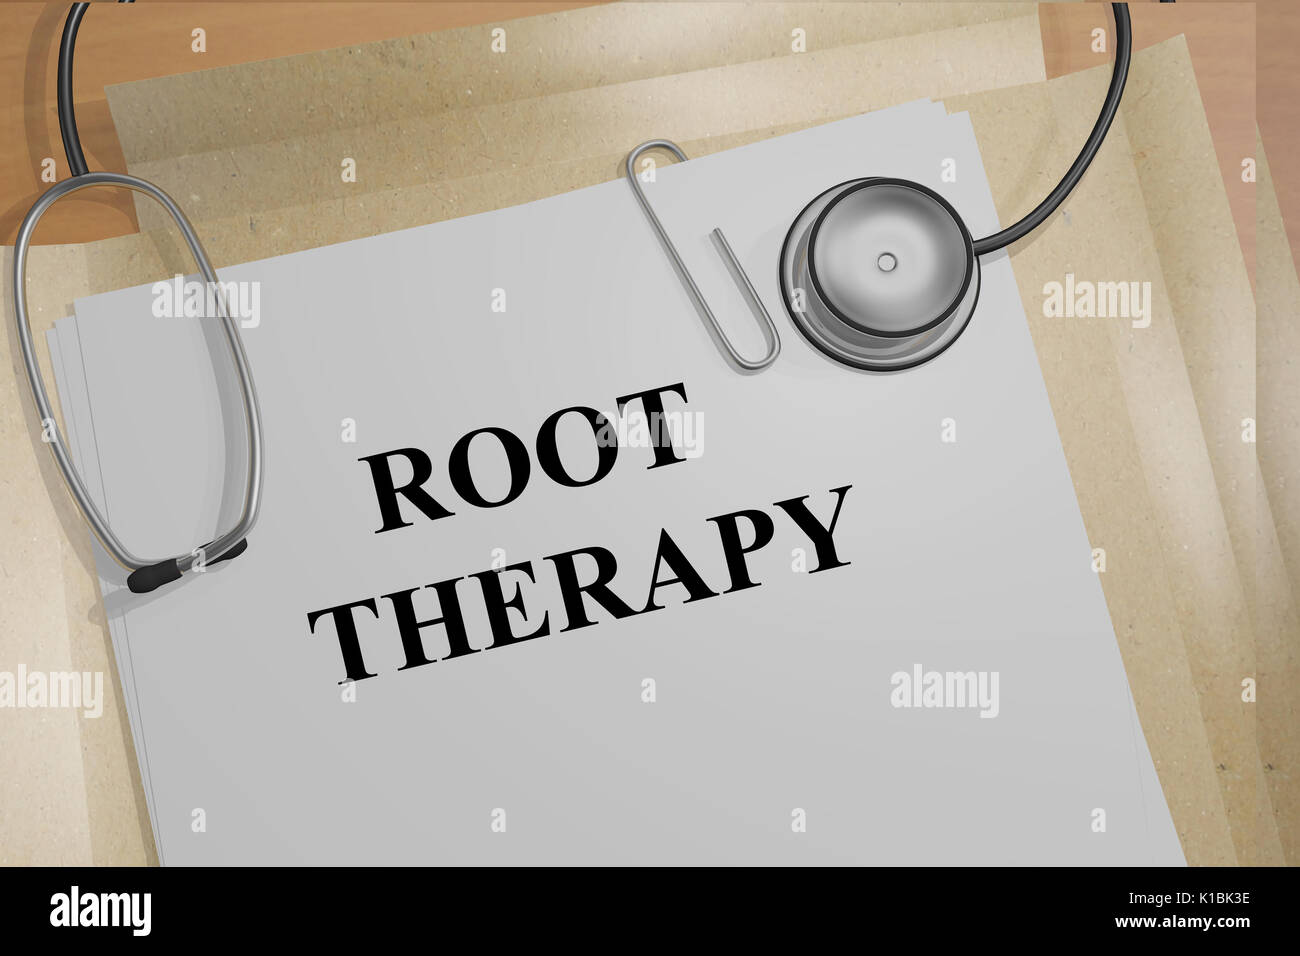 3D illustration of ROOT THERAPY title on medical documents. Medicial concept. Stock Photo